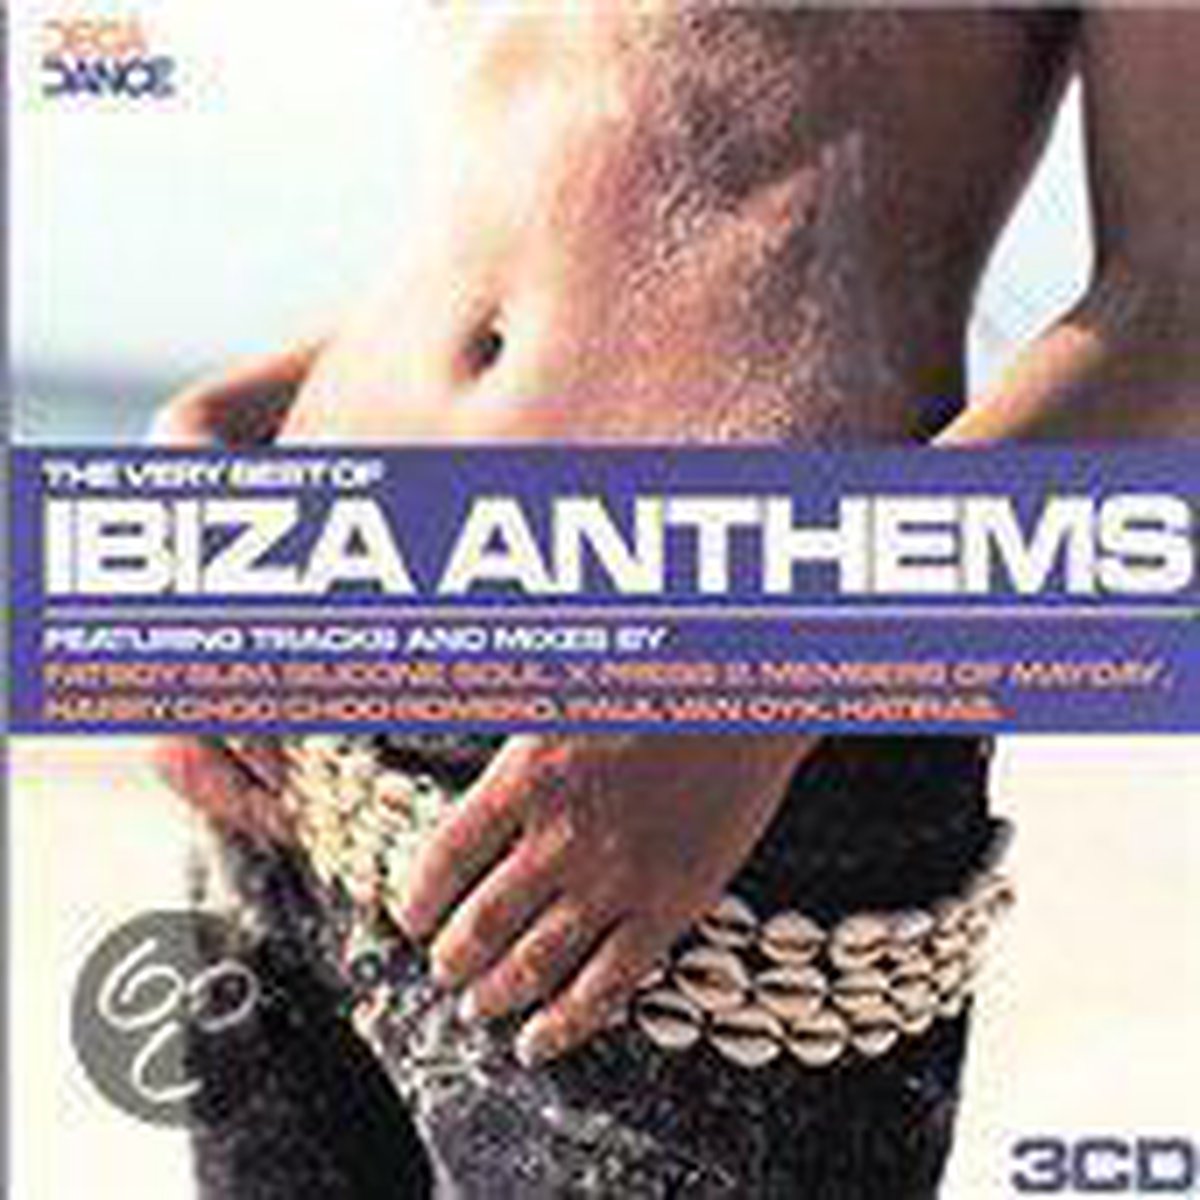 The Very Best Of Ibiza Anthems - various artists